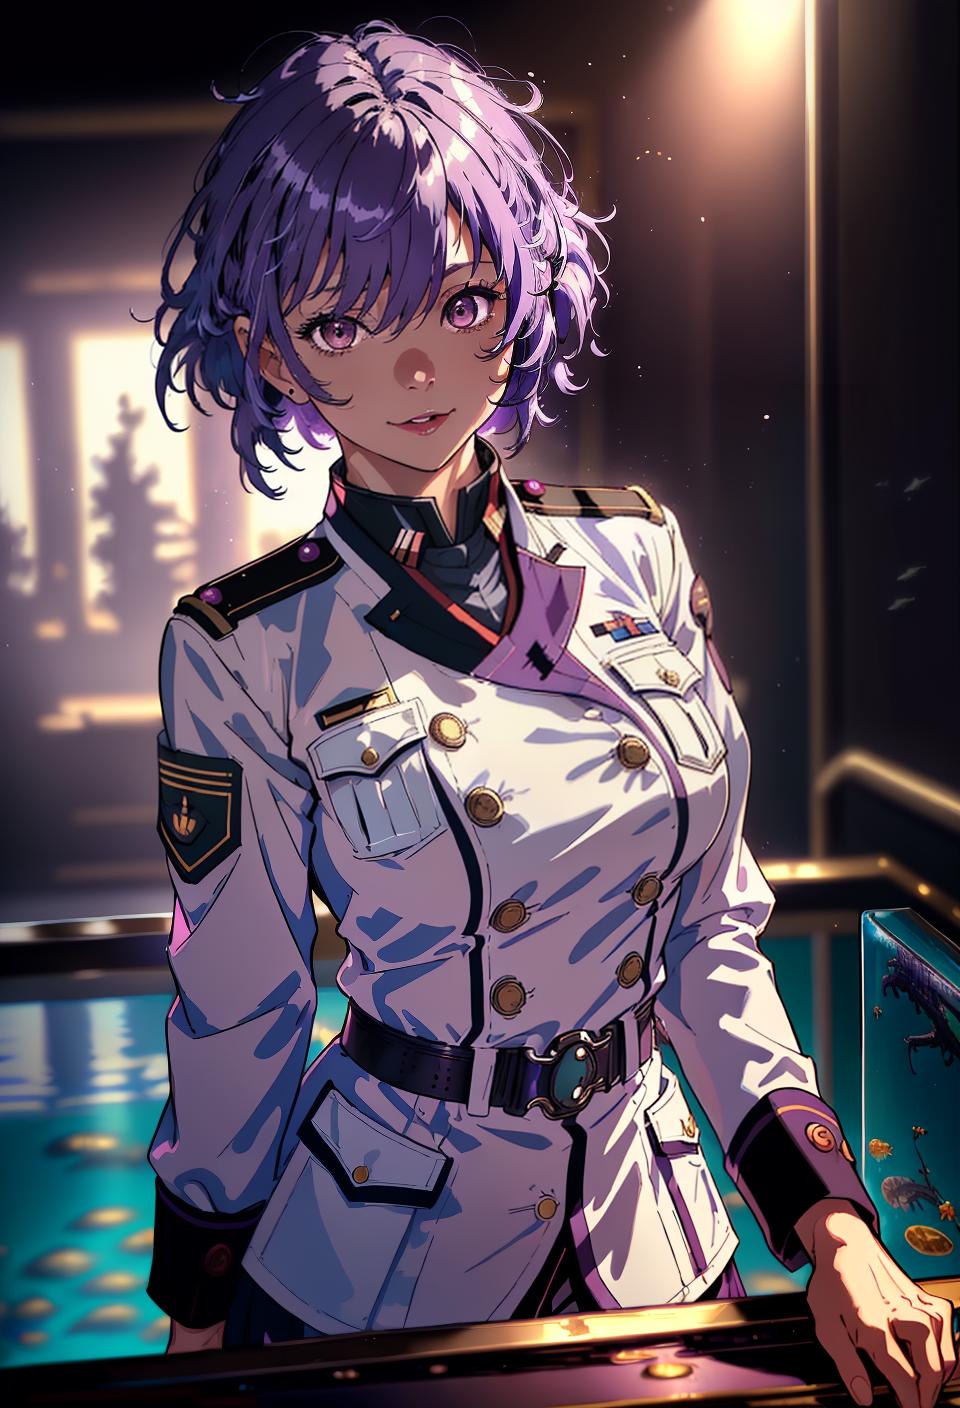  ((trending, highres, masterpiece, cinematic shot)), 1girl, mature, female military uniform, large, aquarium scene, very short messy light purple hair, hair covering one eye, large brown eyes, reserved personality, happy expression, dark skin, magical, energetic